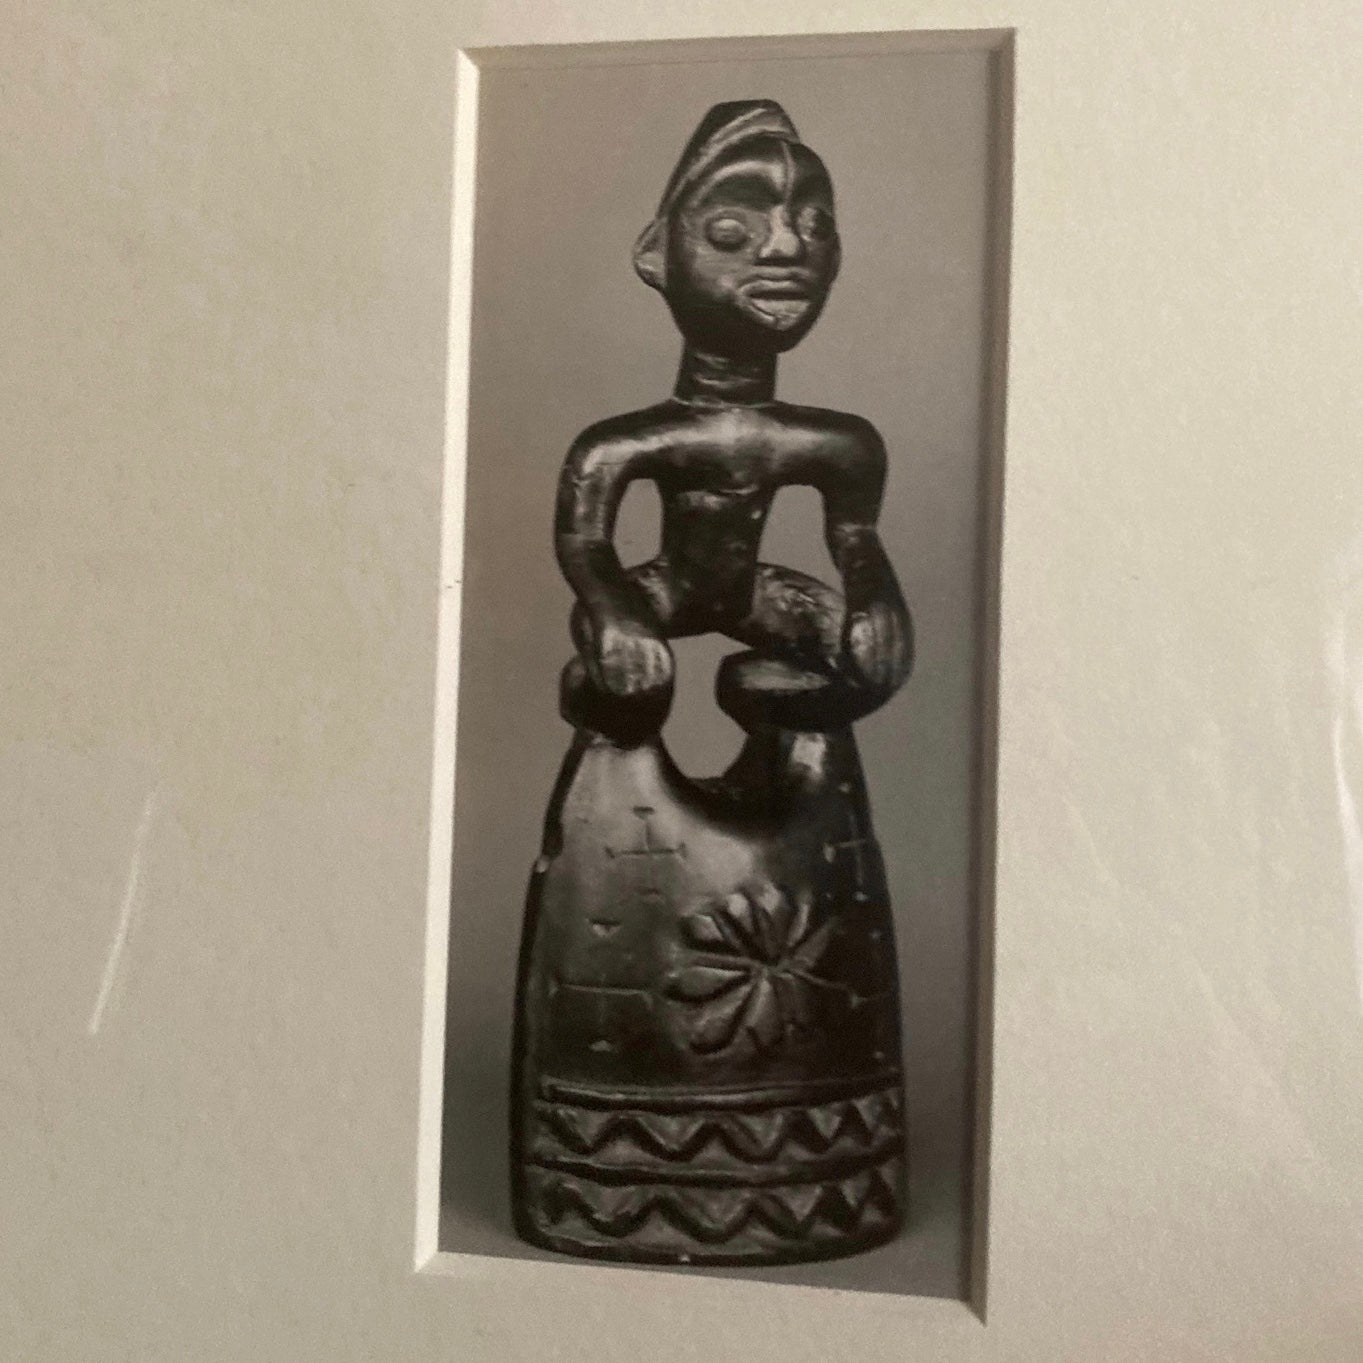 Photograph of an African Sculpture. Walker Evans, 1935 (possibly a print by John Cheever)